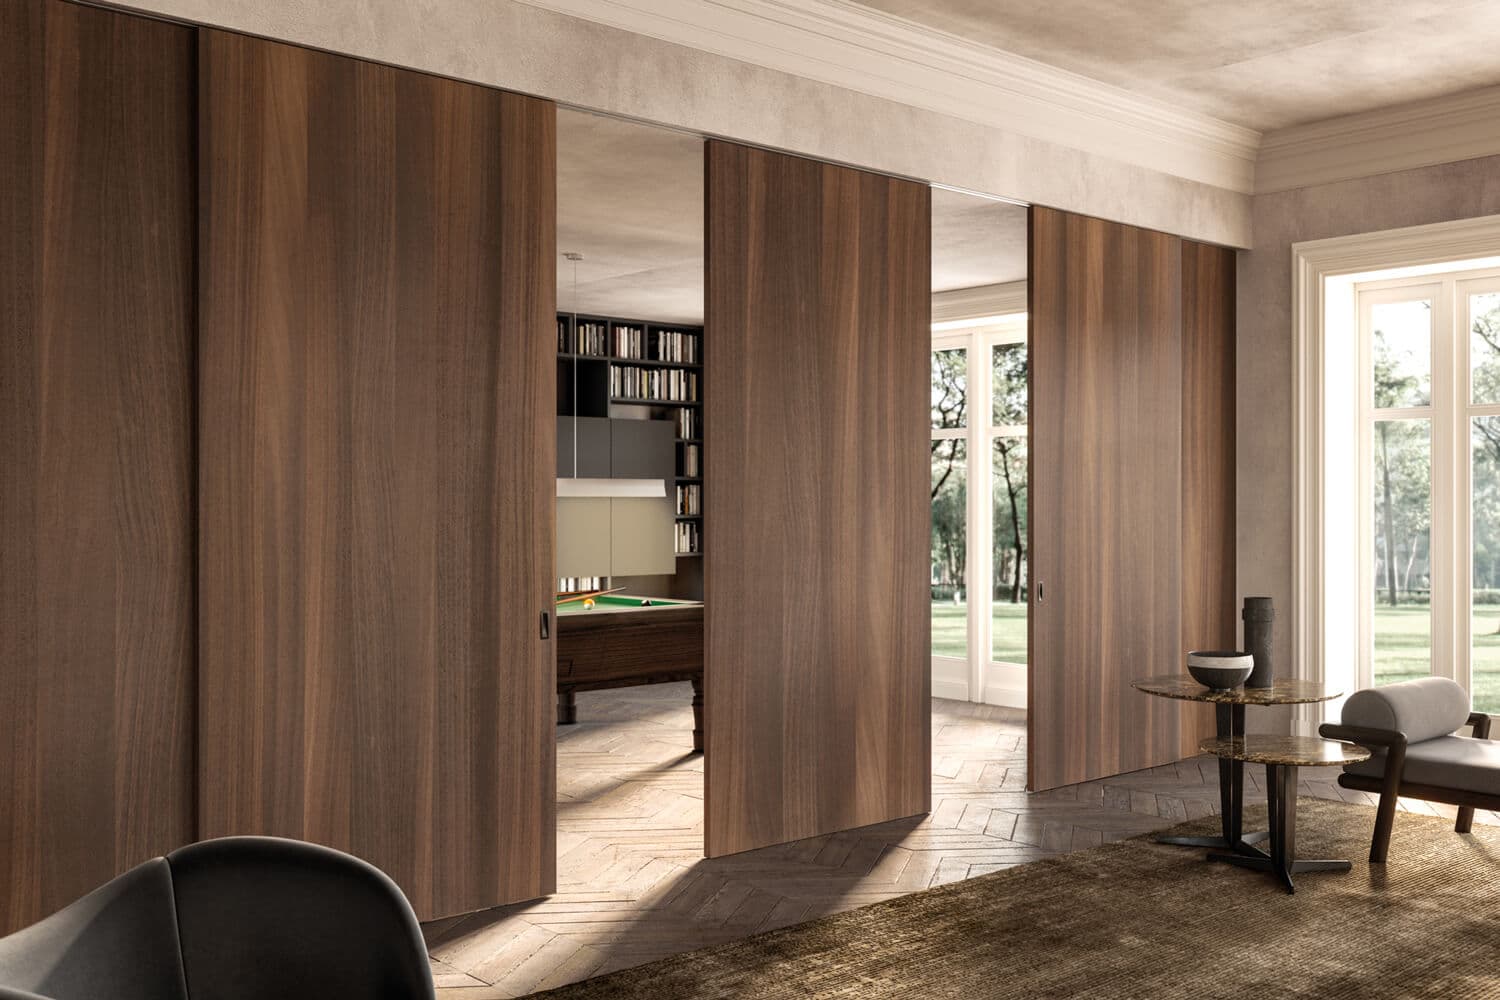 The Adela interior door system allows you to create practical and sophisticated partitions for an open floorplan. The minimalist door design lets the wood finish make a statement. Shown: Eucalyptus finish with Moka handles. Sliding doors on outer surface of the matching wall.